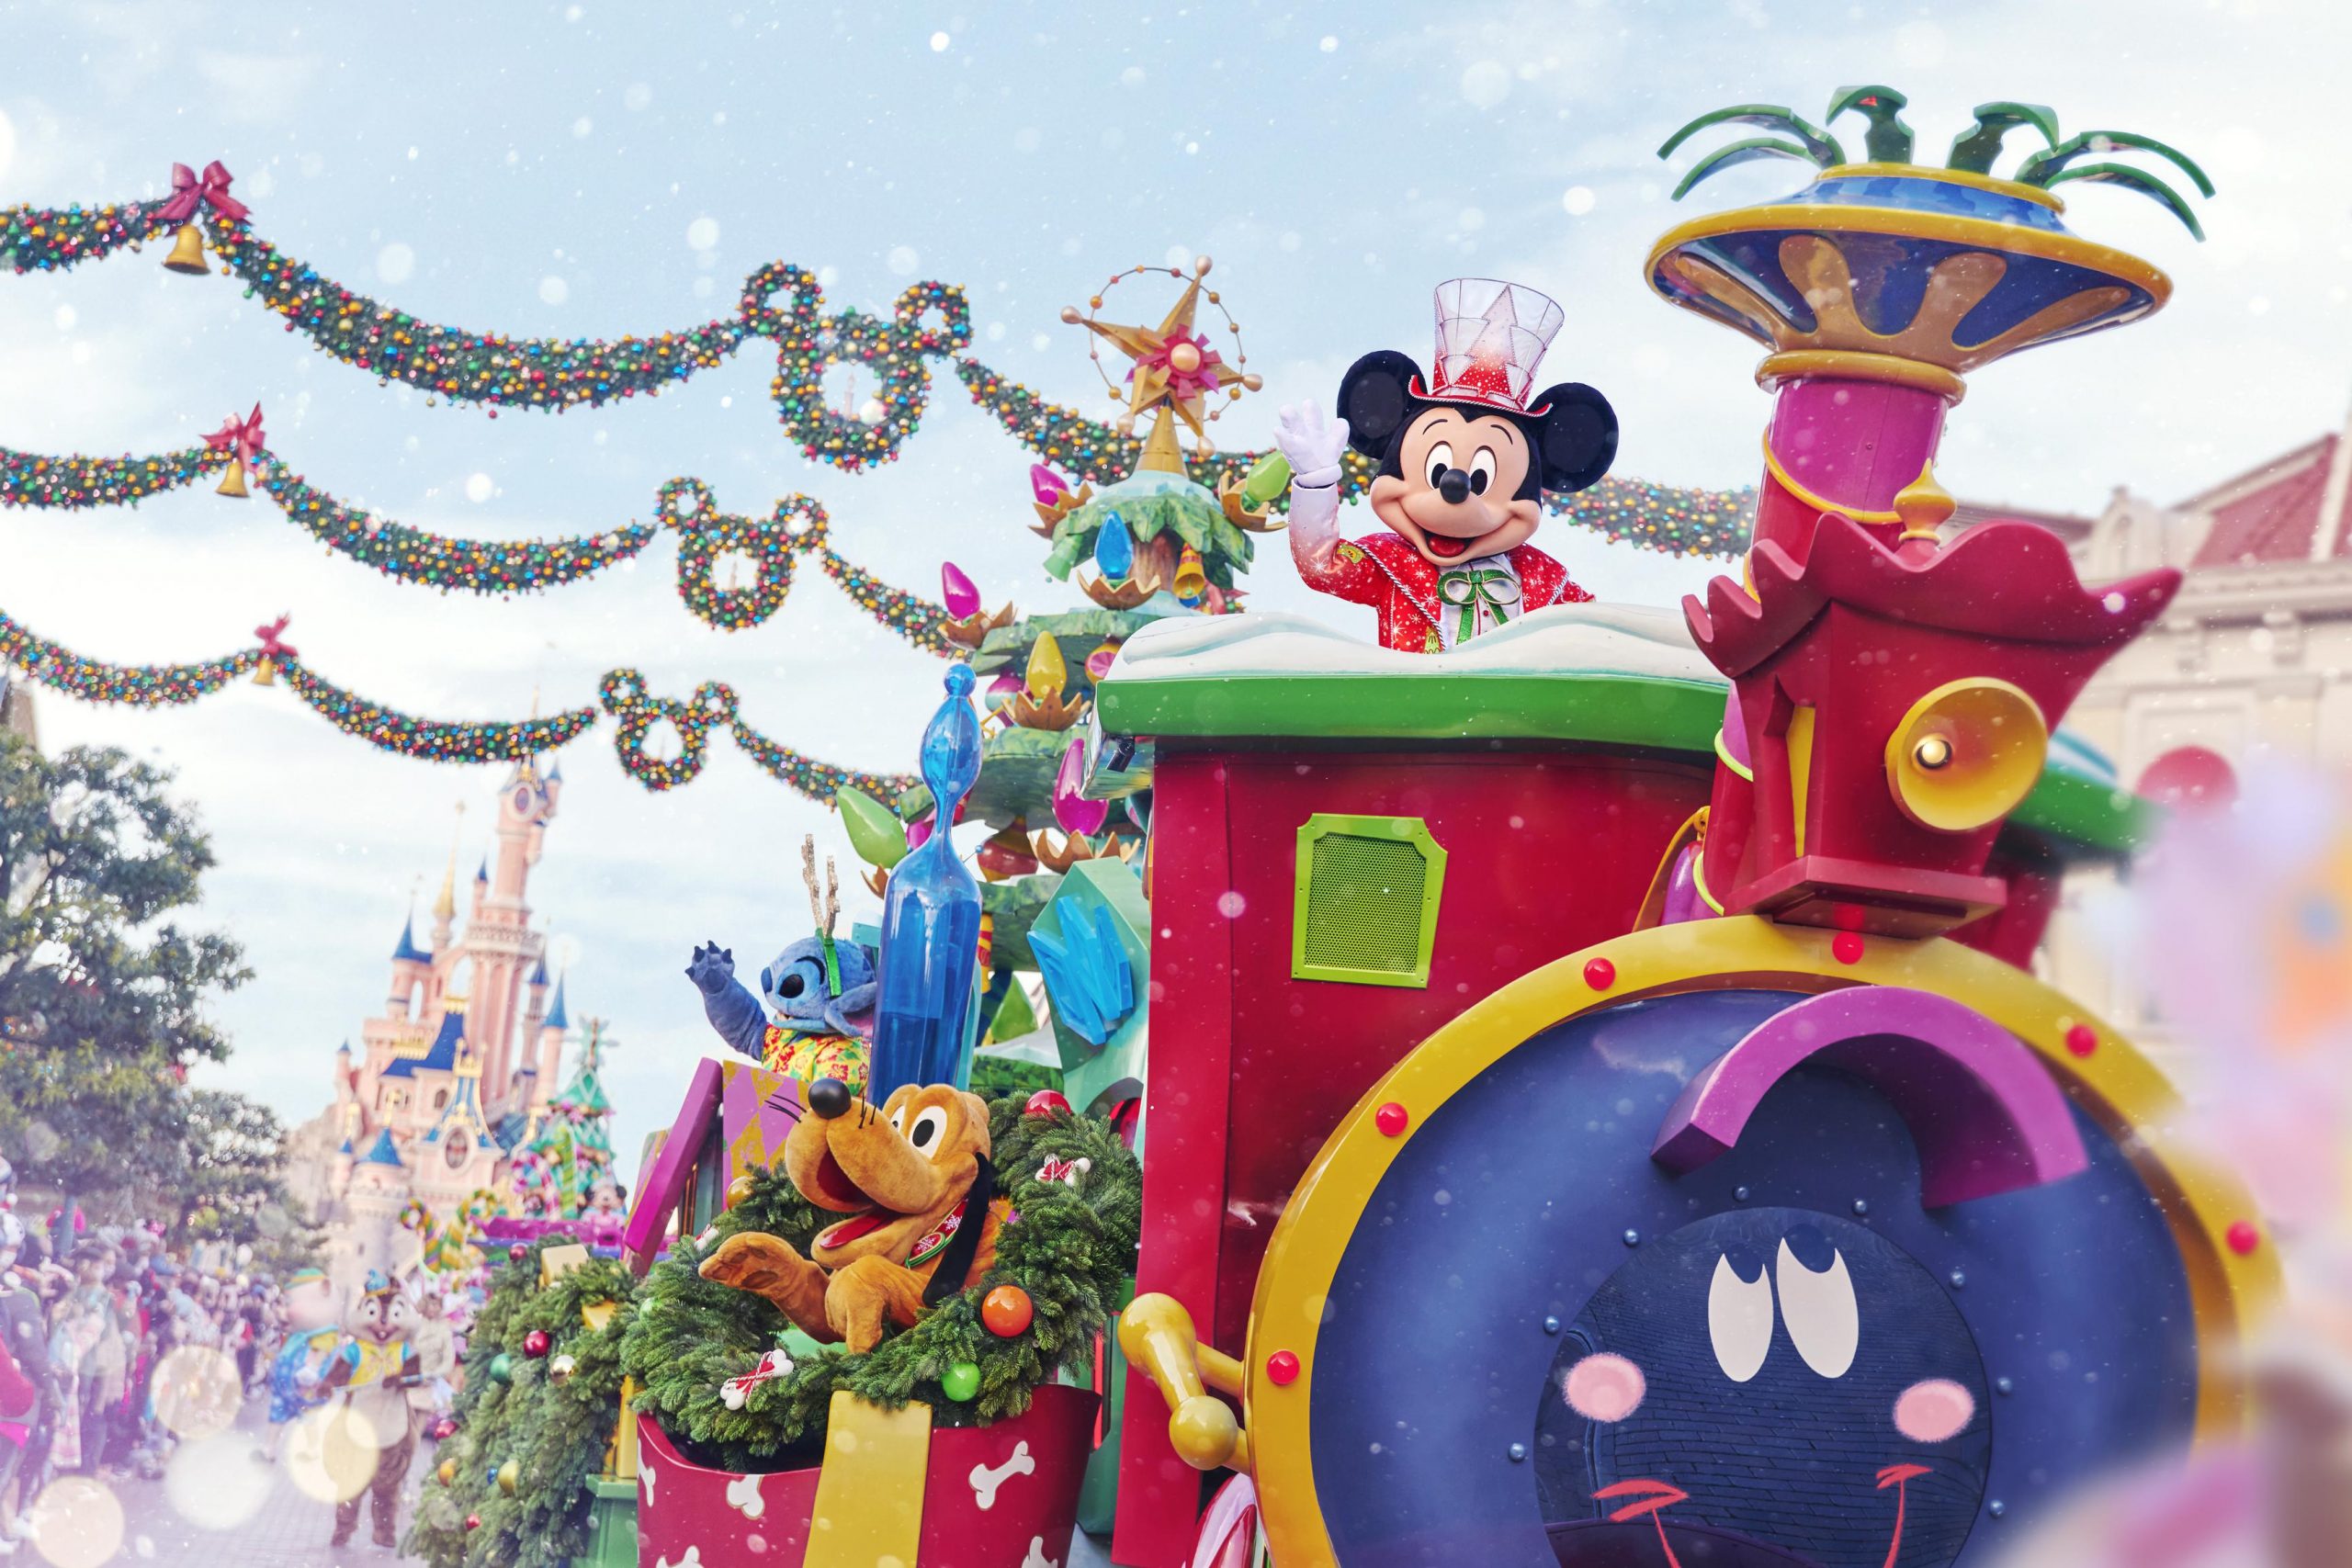 As Part of the 30th Anniversary Celebration, the Magic of Christmas will be Even Stronger at Disneyland Paris from November 12th, 2022 to January 8th, 2023